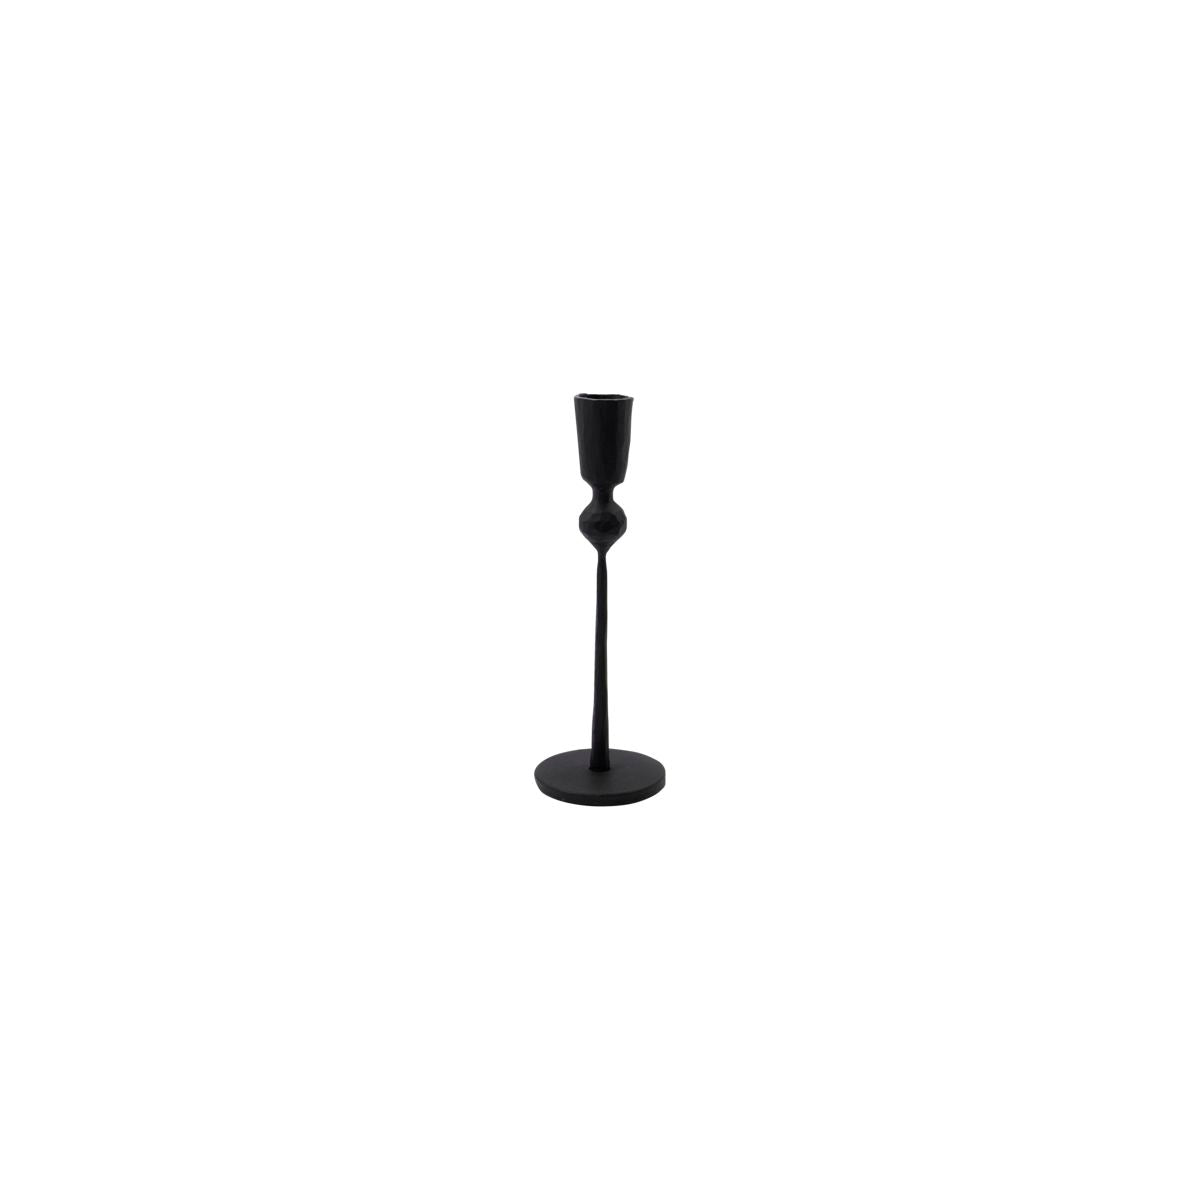 Candle stand, Trivo, handmade in Iron, Black 18cm h